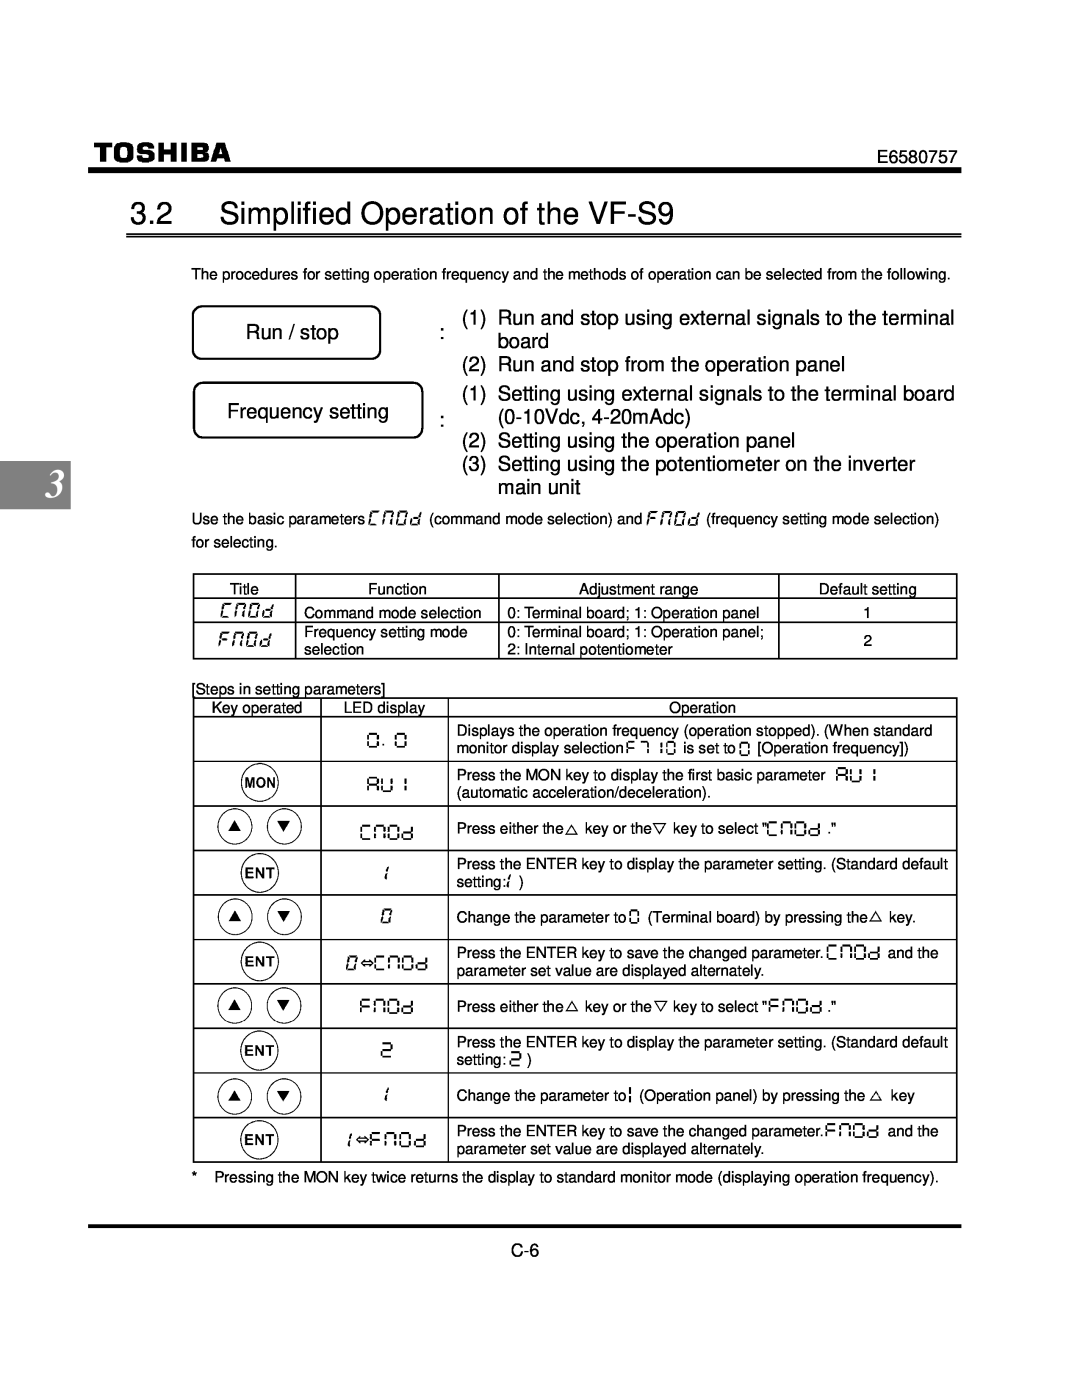 Toshiba manual Simplified Operation of the VF-S9 